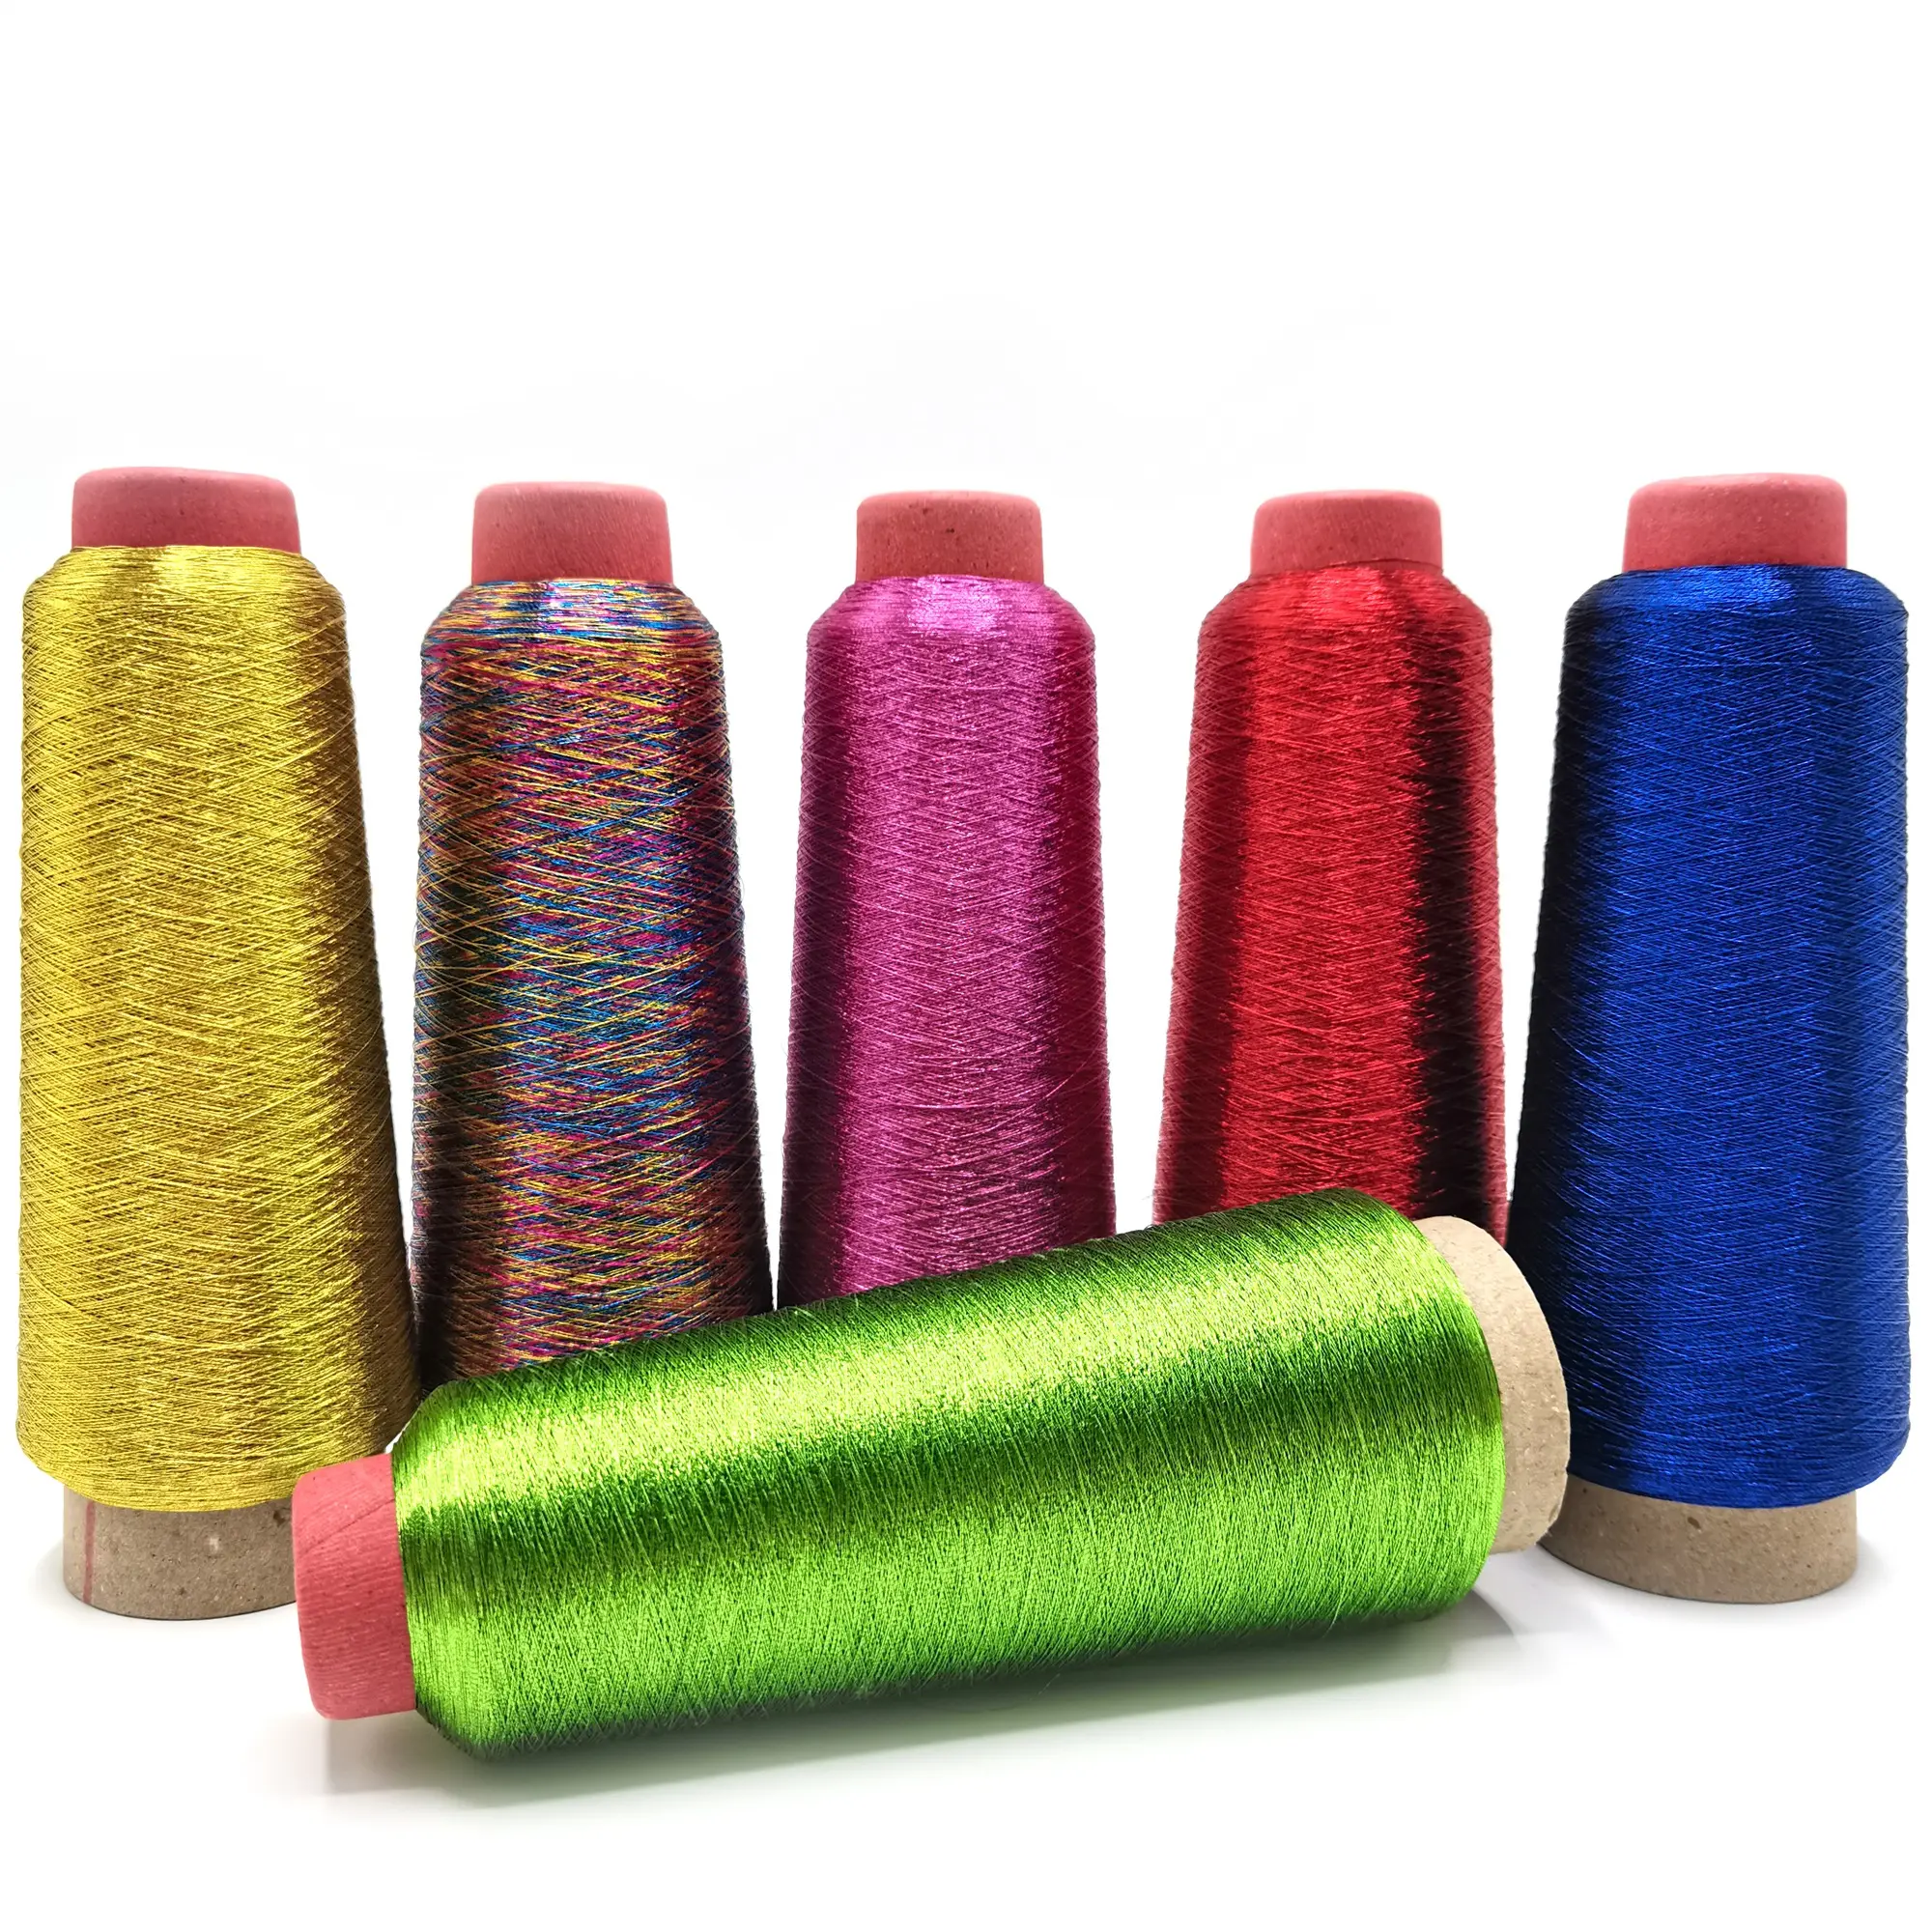 Size A /class 15 Prewound Bobbin Thread 100% Polyester High Strength  Embroidery 25 Colors Available - Thread - AliExpress